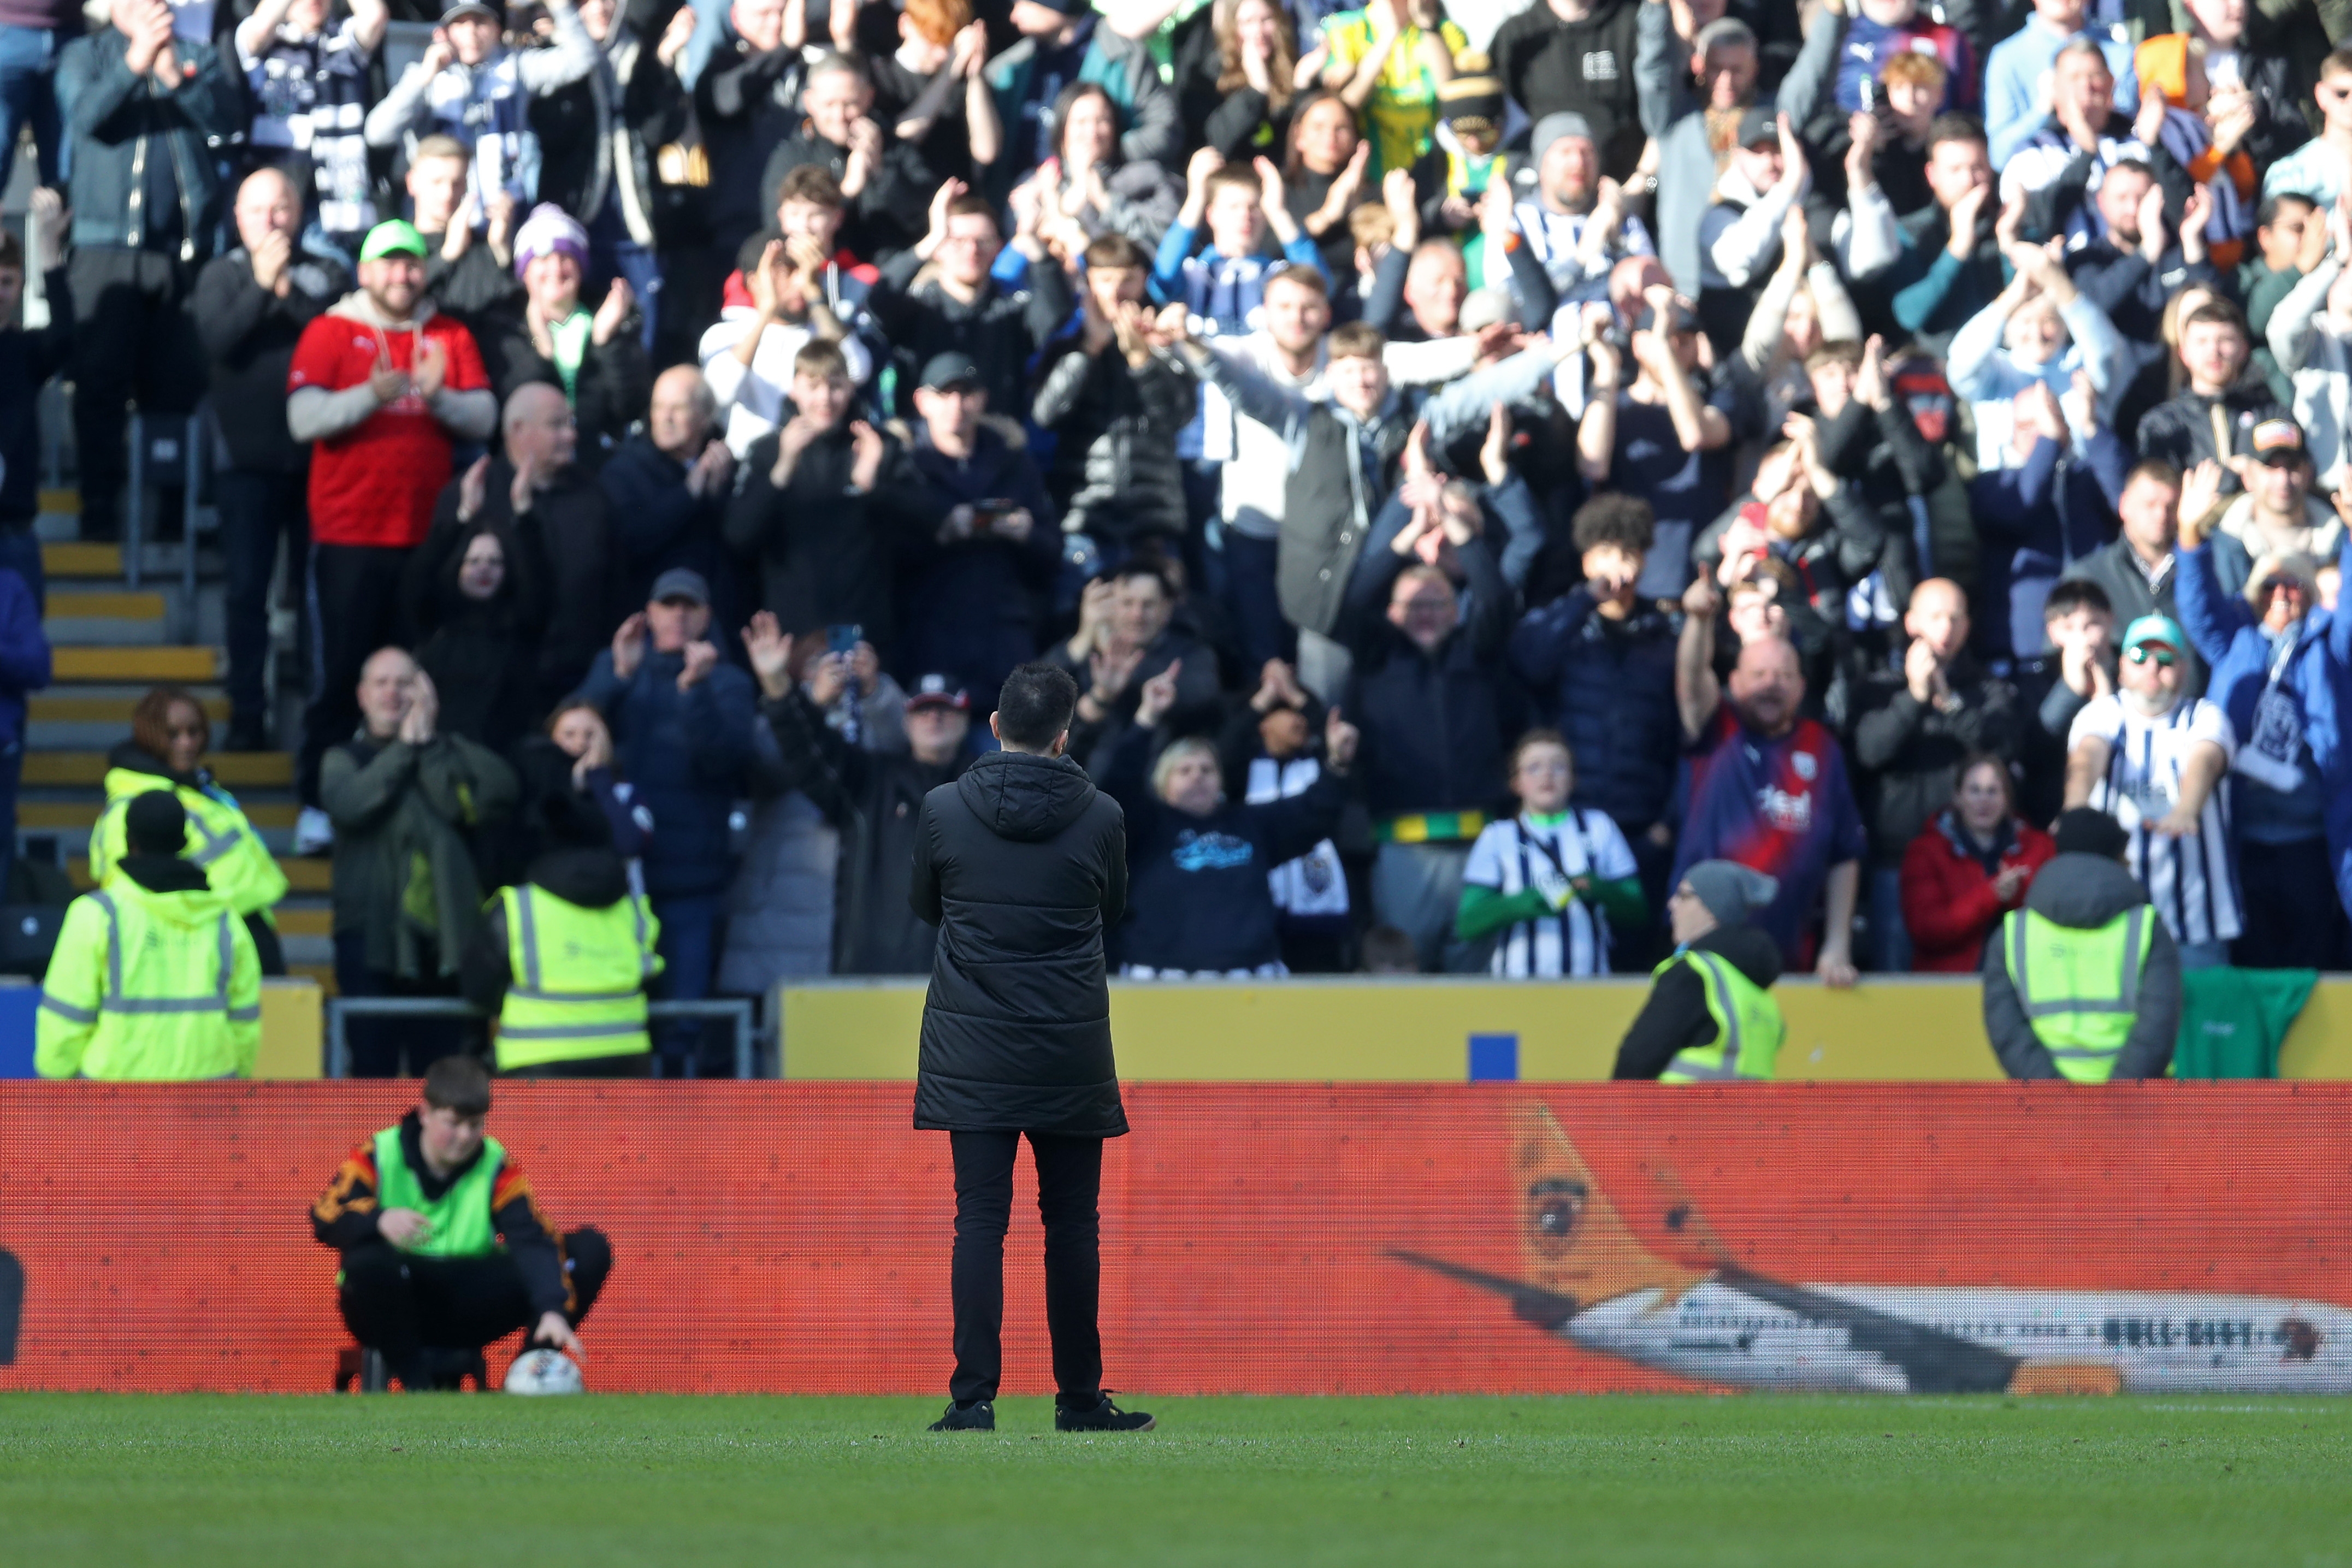 Carlos Corberán applauding Albion fans in the background at the MKM Stadium